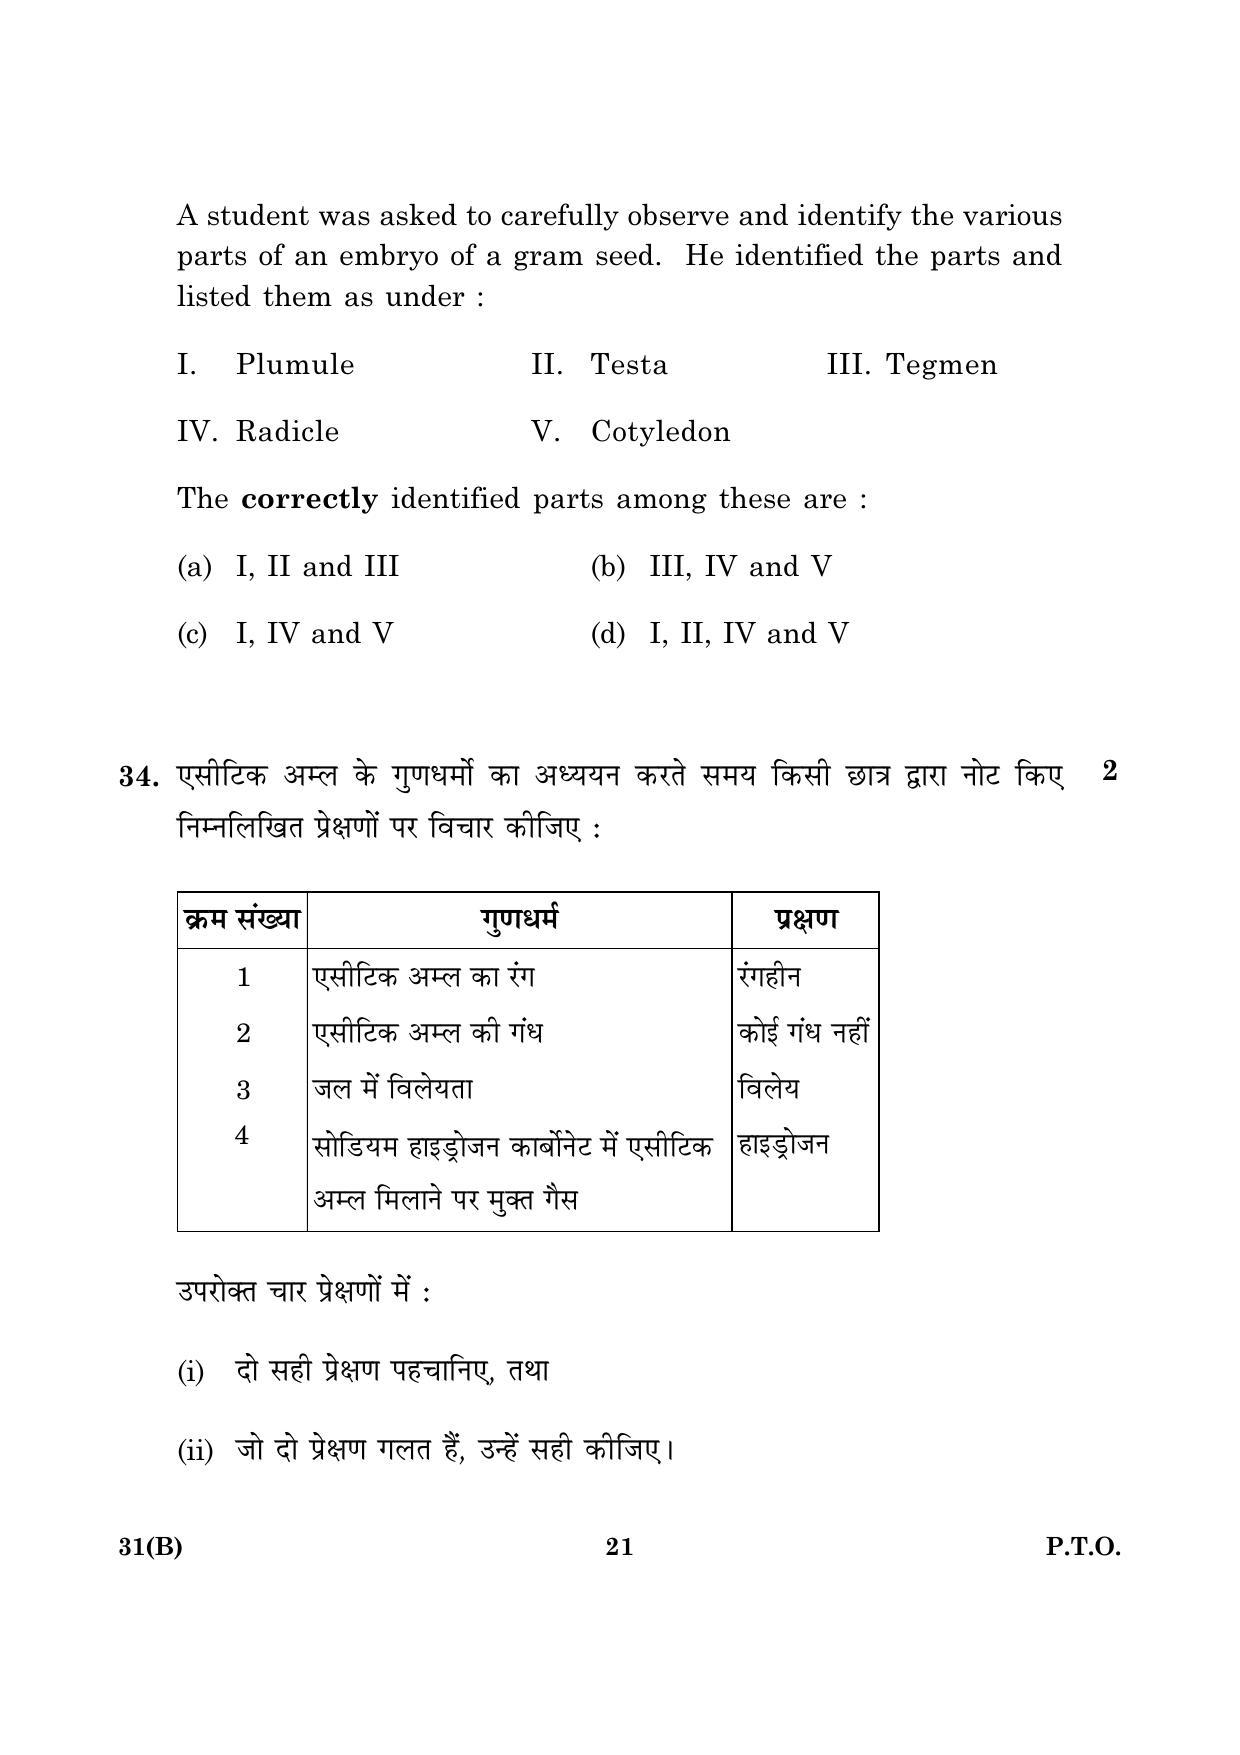 CBSE Class 10 031(B) Science 2016 Question Paper - Page 21